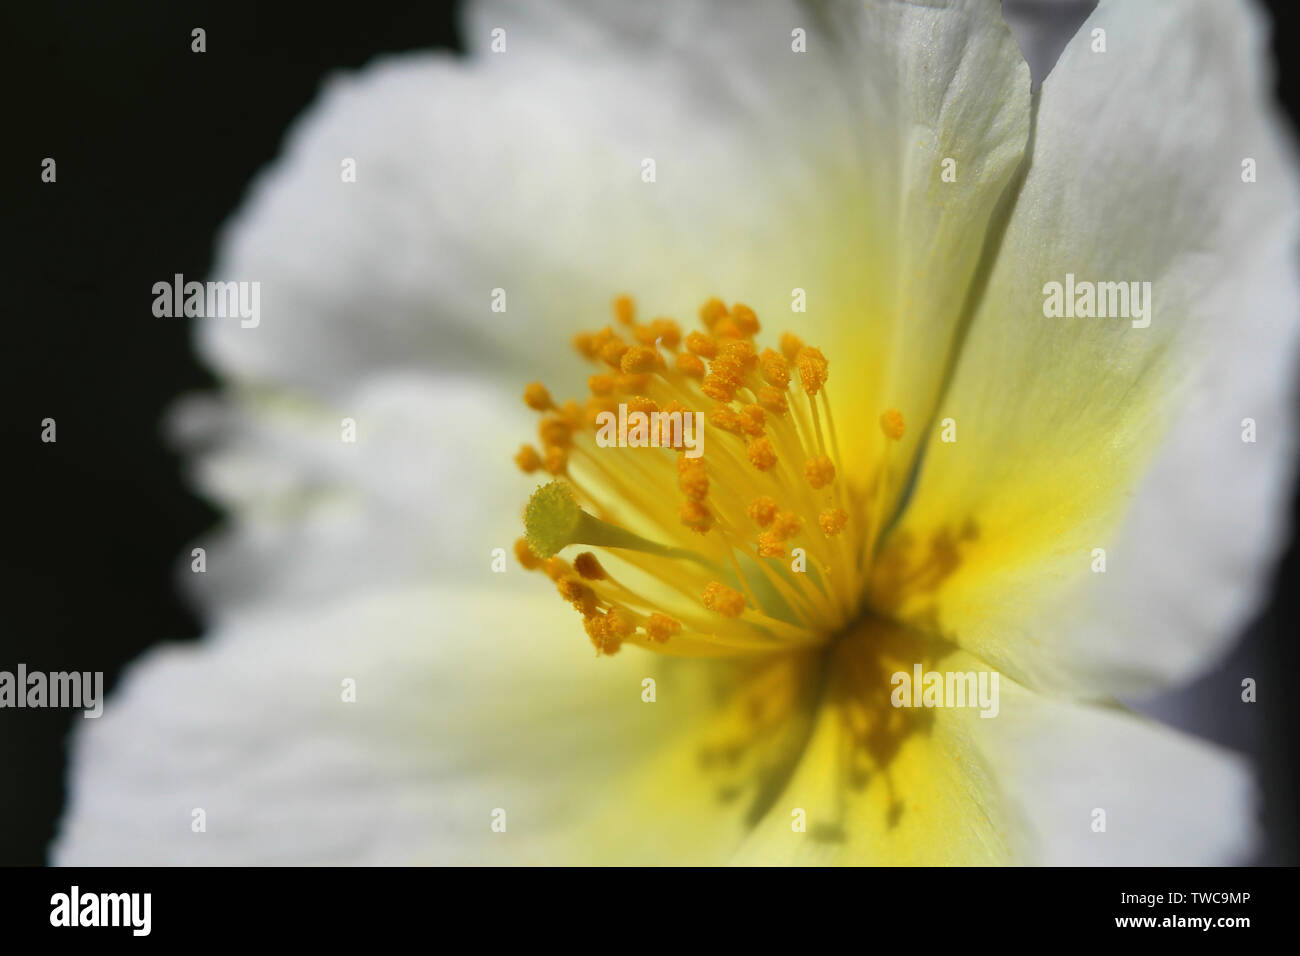 Extreme close up image of the lovely white flower of Helianthemum apenninum also known as rock rose or sun rose. Stock Photo